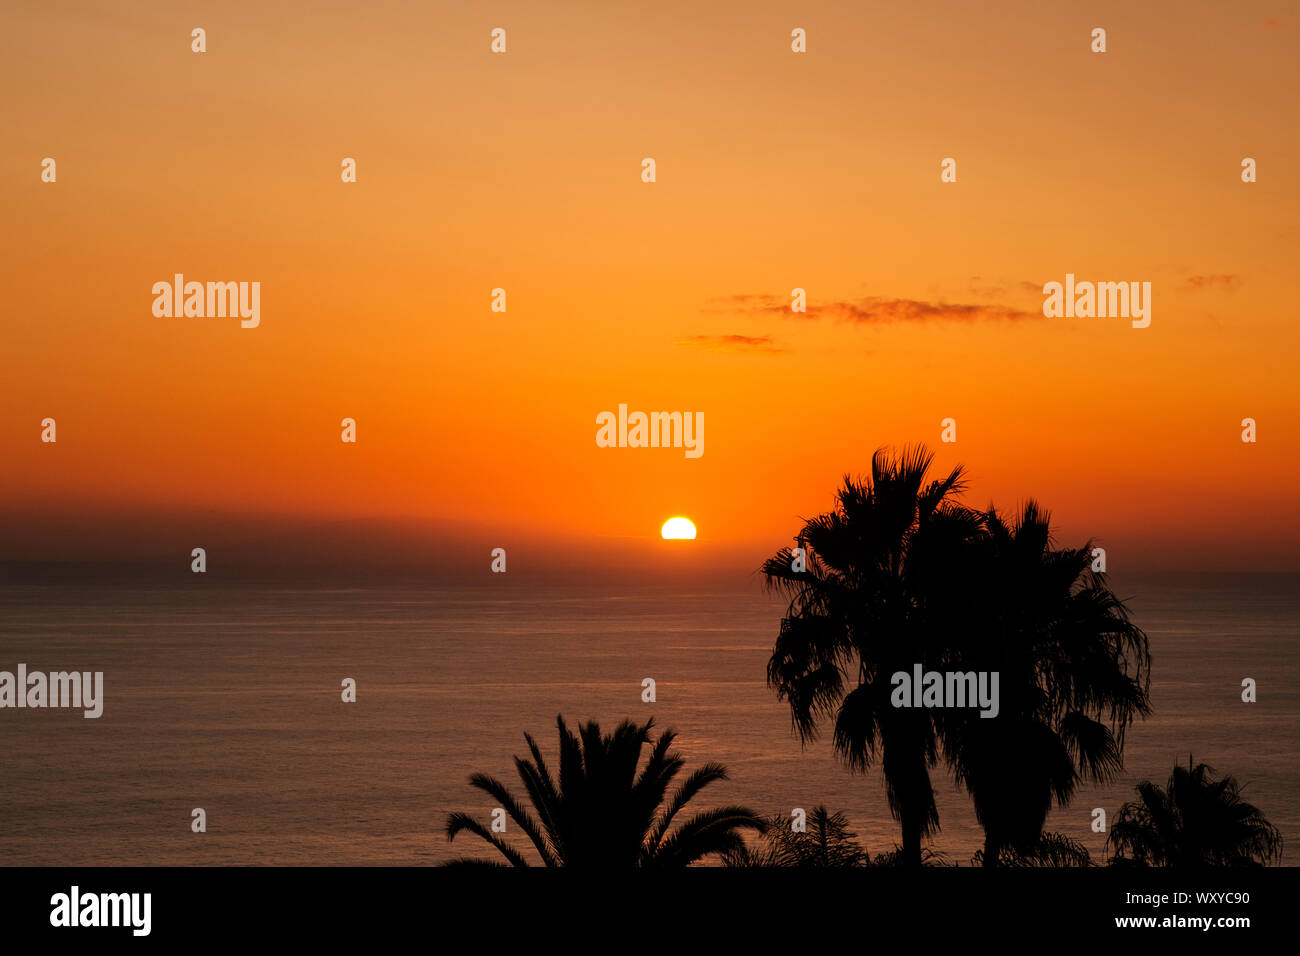 scenic sunset sky with ocean background and palm tree silhouette Stock Photo